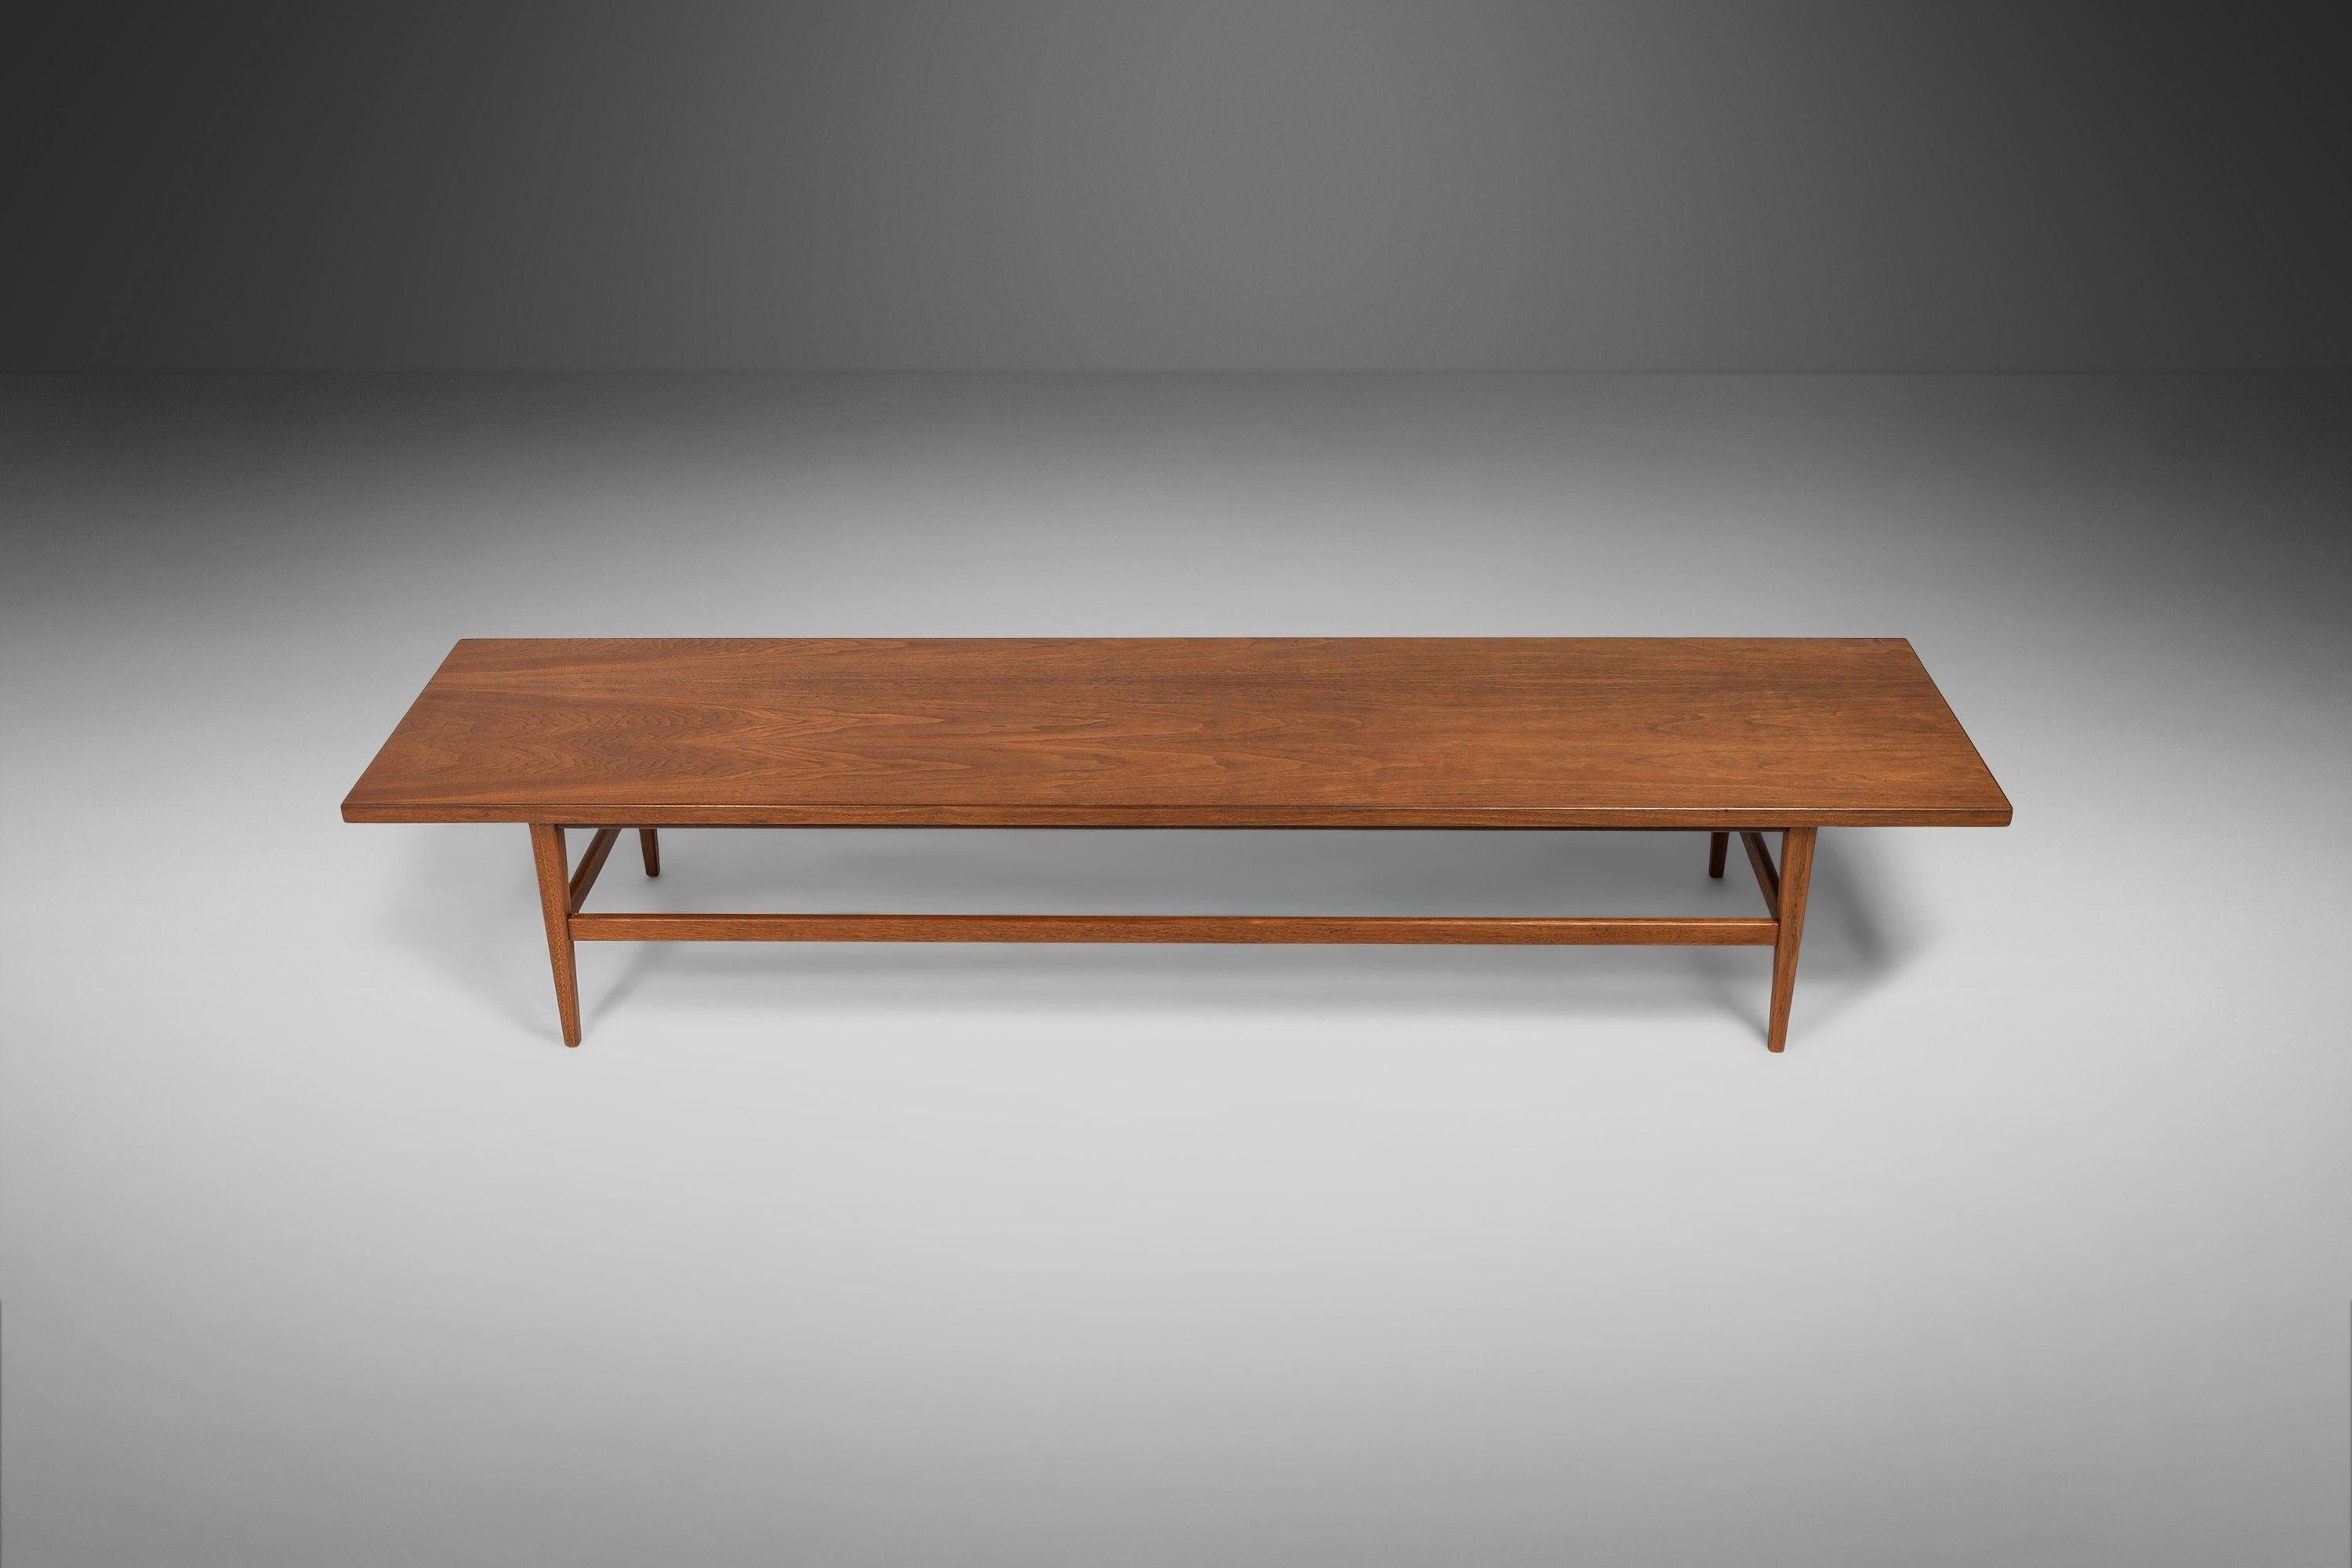 Extra Long Mid-Century Modern Coffee Table / Bench in Walnut, c. 1960's For Sale 5